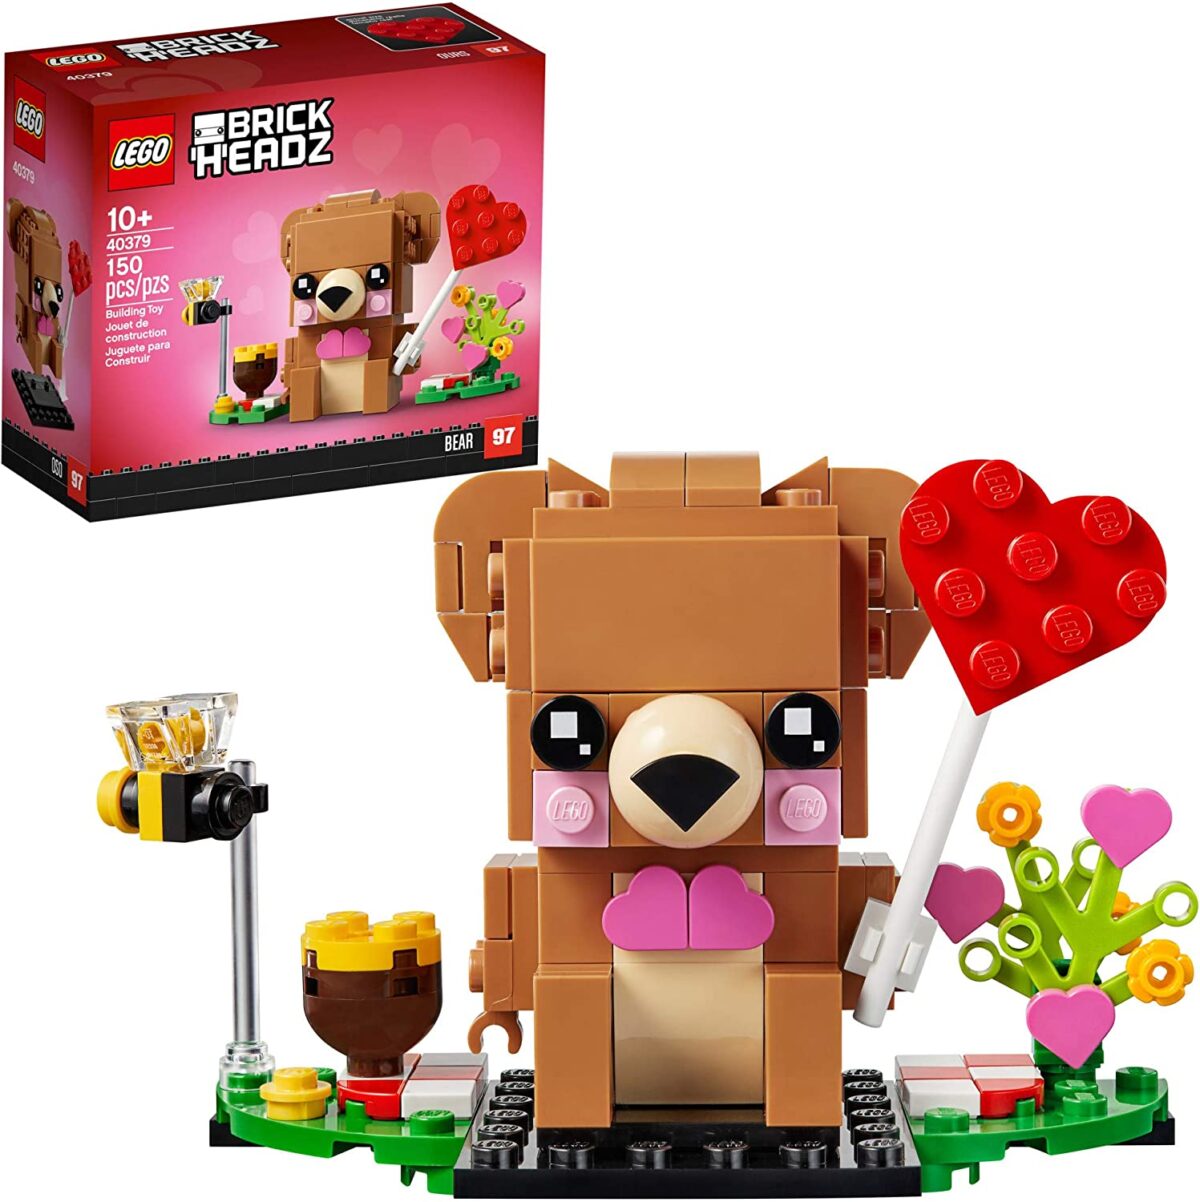 Lego Valentine's Day gift idea for sons | The Dating Divas